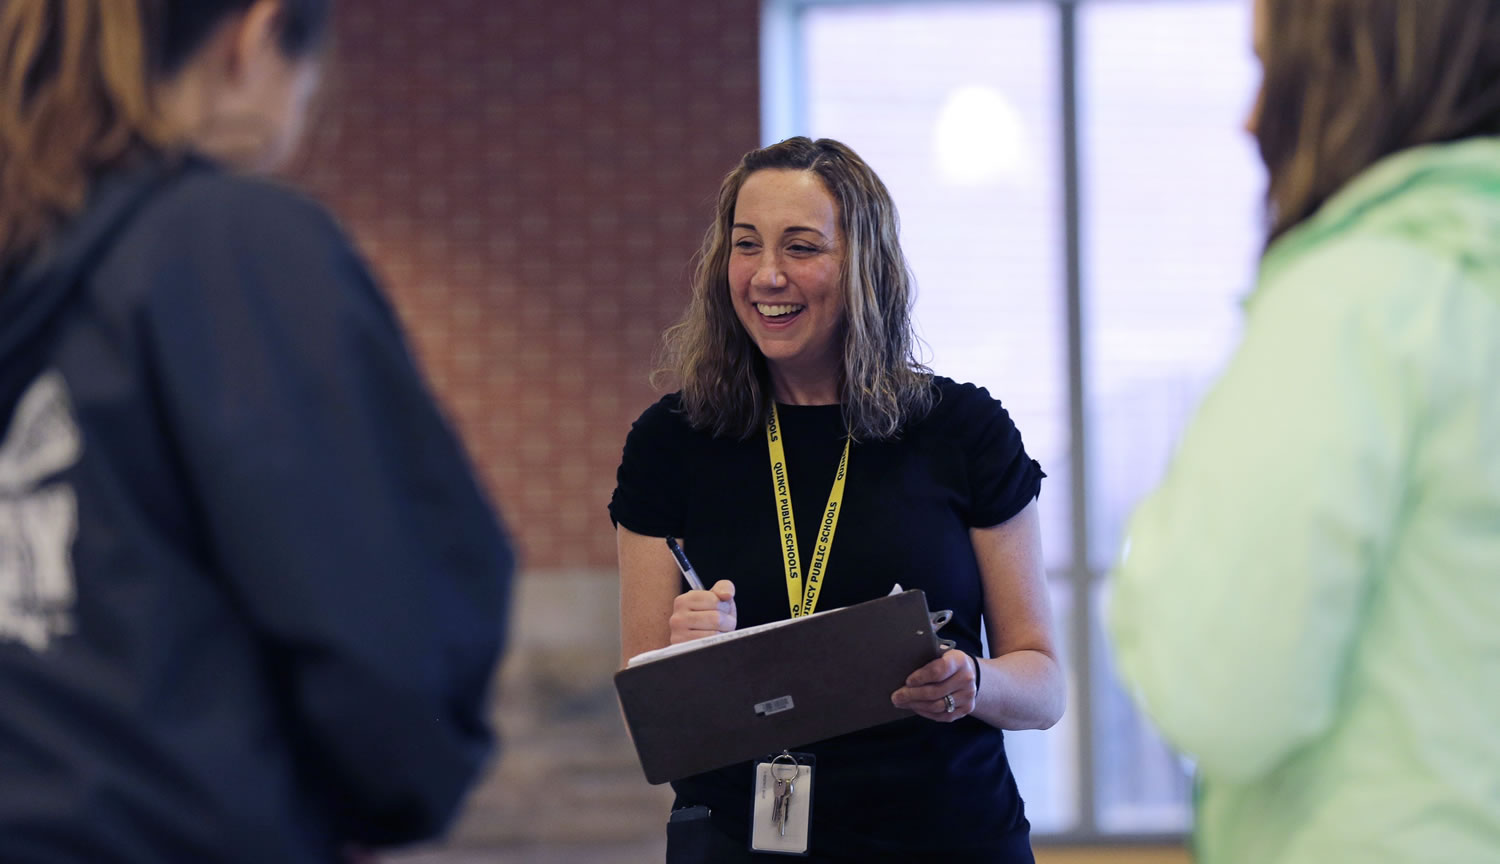 Cancer survivor Christine Ells talks with her students as she takes attendance at Quincy High School in Quincy, Mass. Ells, 36, developed a heart rhythm problem from several drugs she was given to treat the breast cancer she was diagnosed with at age 27.